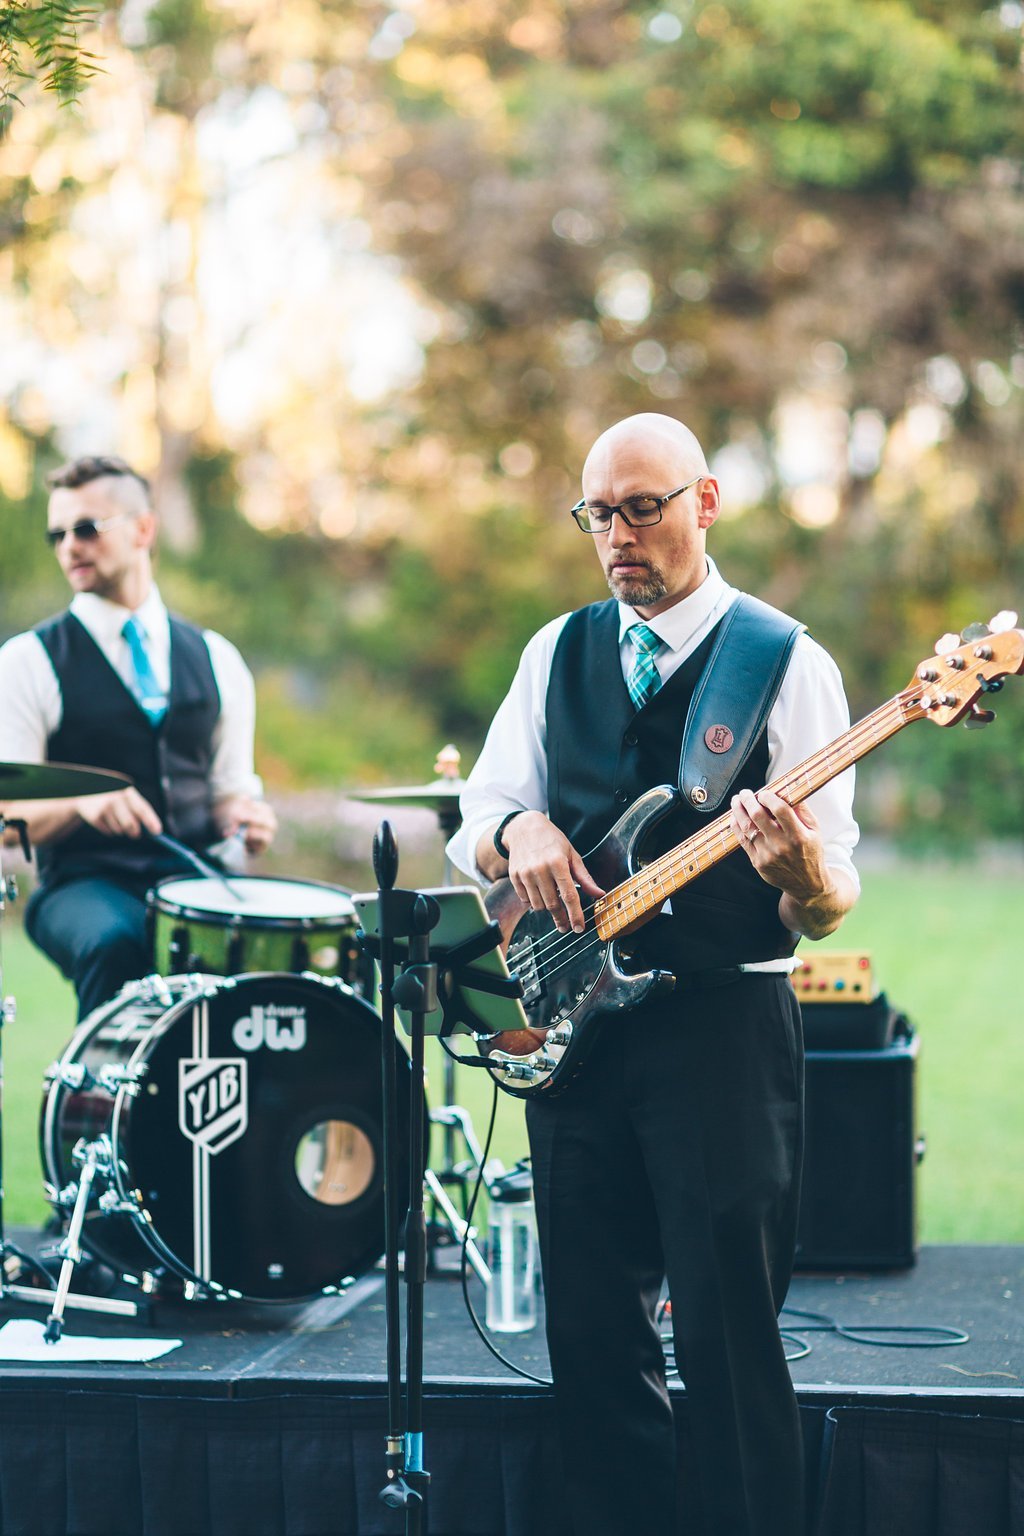 www.santabarbarawedding.com | Vitae Weddings | Summer Newman Events | The Replicas Music | Guitarist and Drummer Playing at Reception